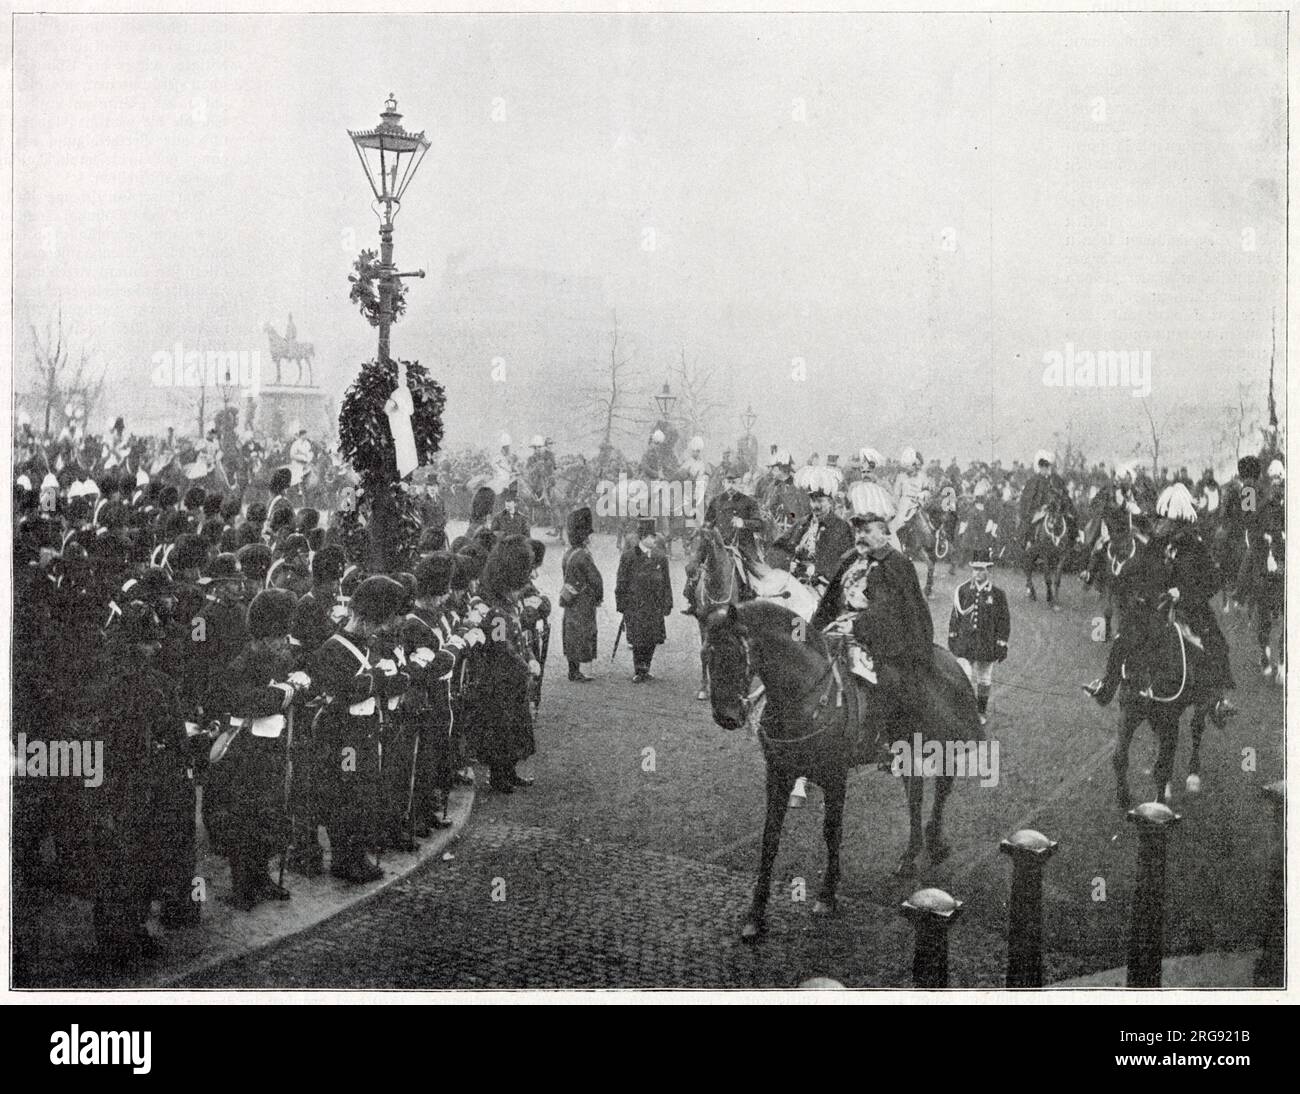 Queen Victoria's funeral. Royal cavalcade passing the Wellington Monument, the future King, Edward VII and Kaiser Wilhelm II of Germany riding behind the coffin. Stock Photo